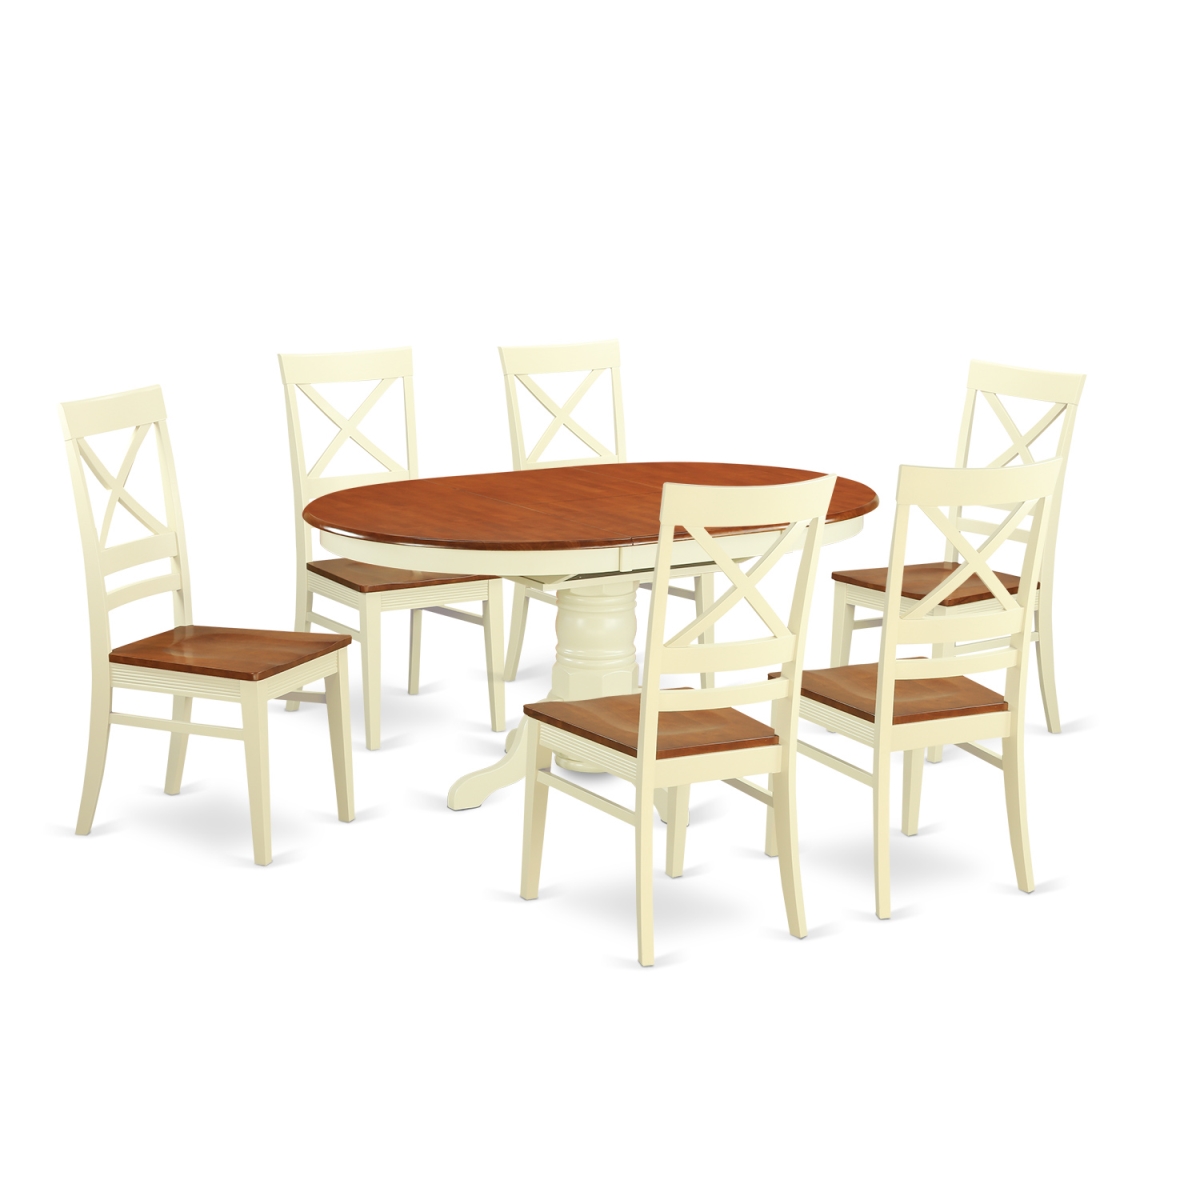 AVQU7-WHI-W Dining Room Sets with 6 Kitchen Table & 6 Chairs, Buttermilk & Cherry - 7 Piece -  East West Furniture